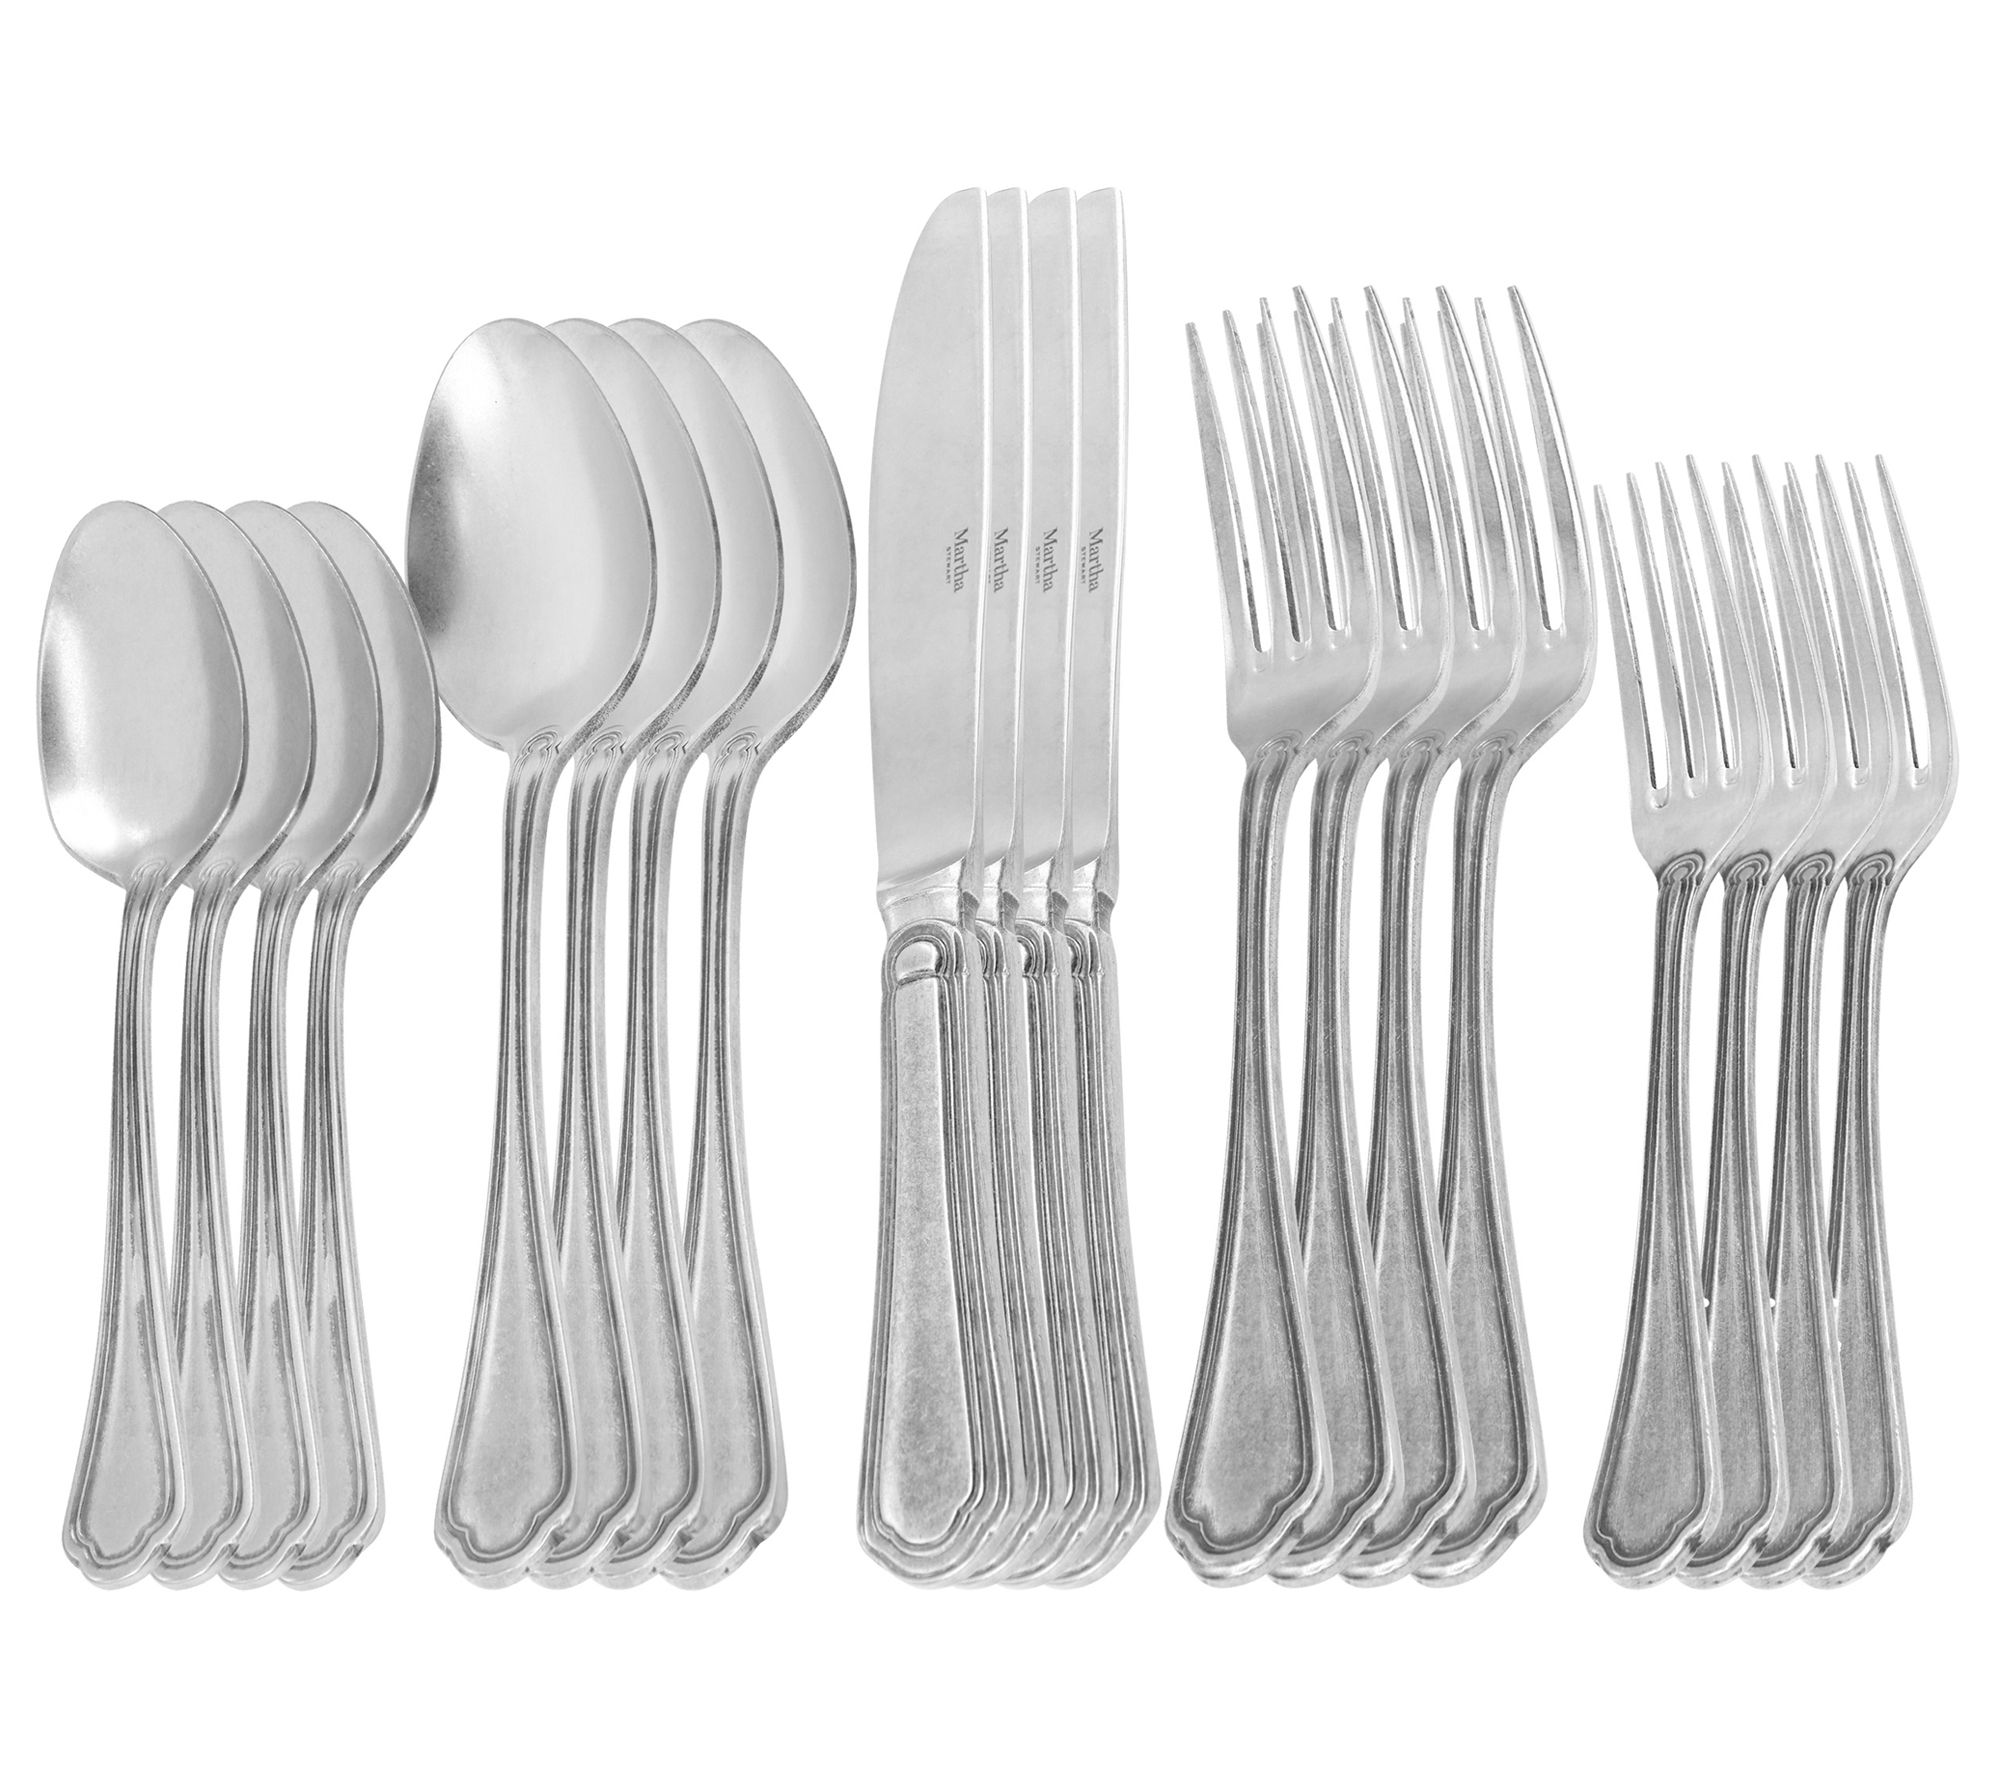 Oster 20 Piece Stainless Steel Flatware and Steak Knife Set